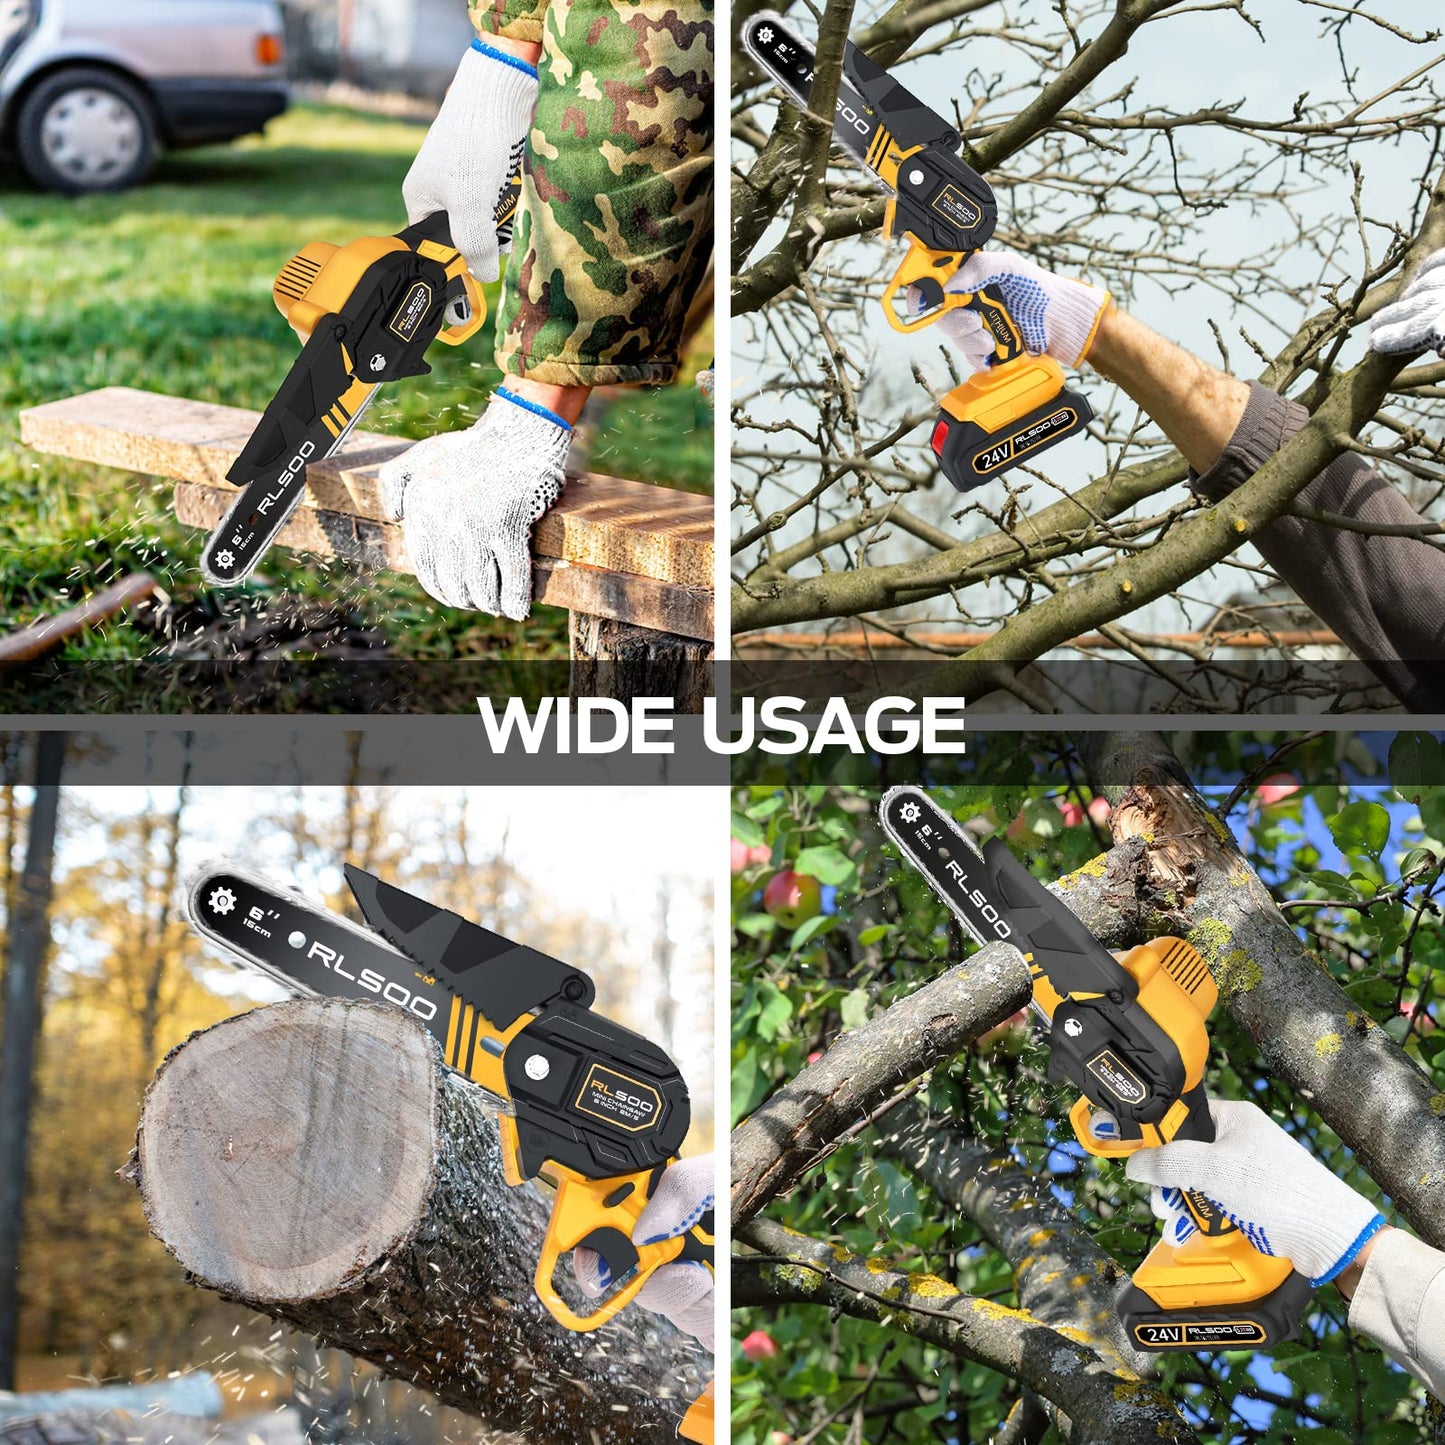 RLSOO 6-Inch Cordless Mini Chainsaw - High-Power, Portable, Lightweight, Ideal for Wood Cutting & Tree Pruning YELLOW